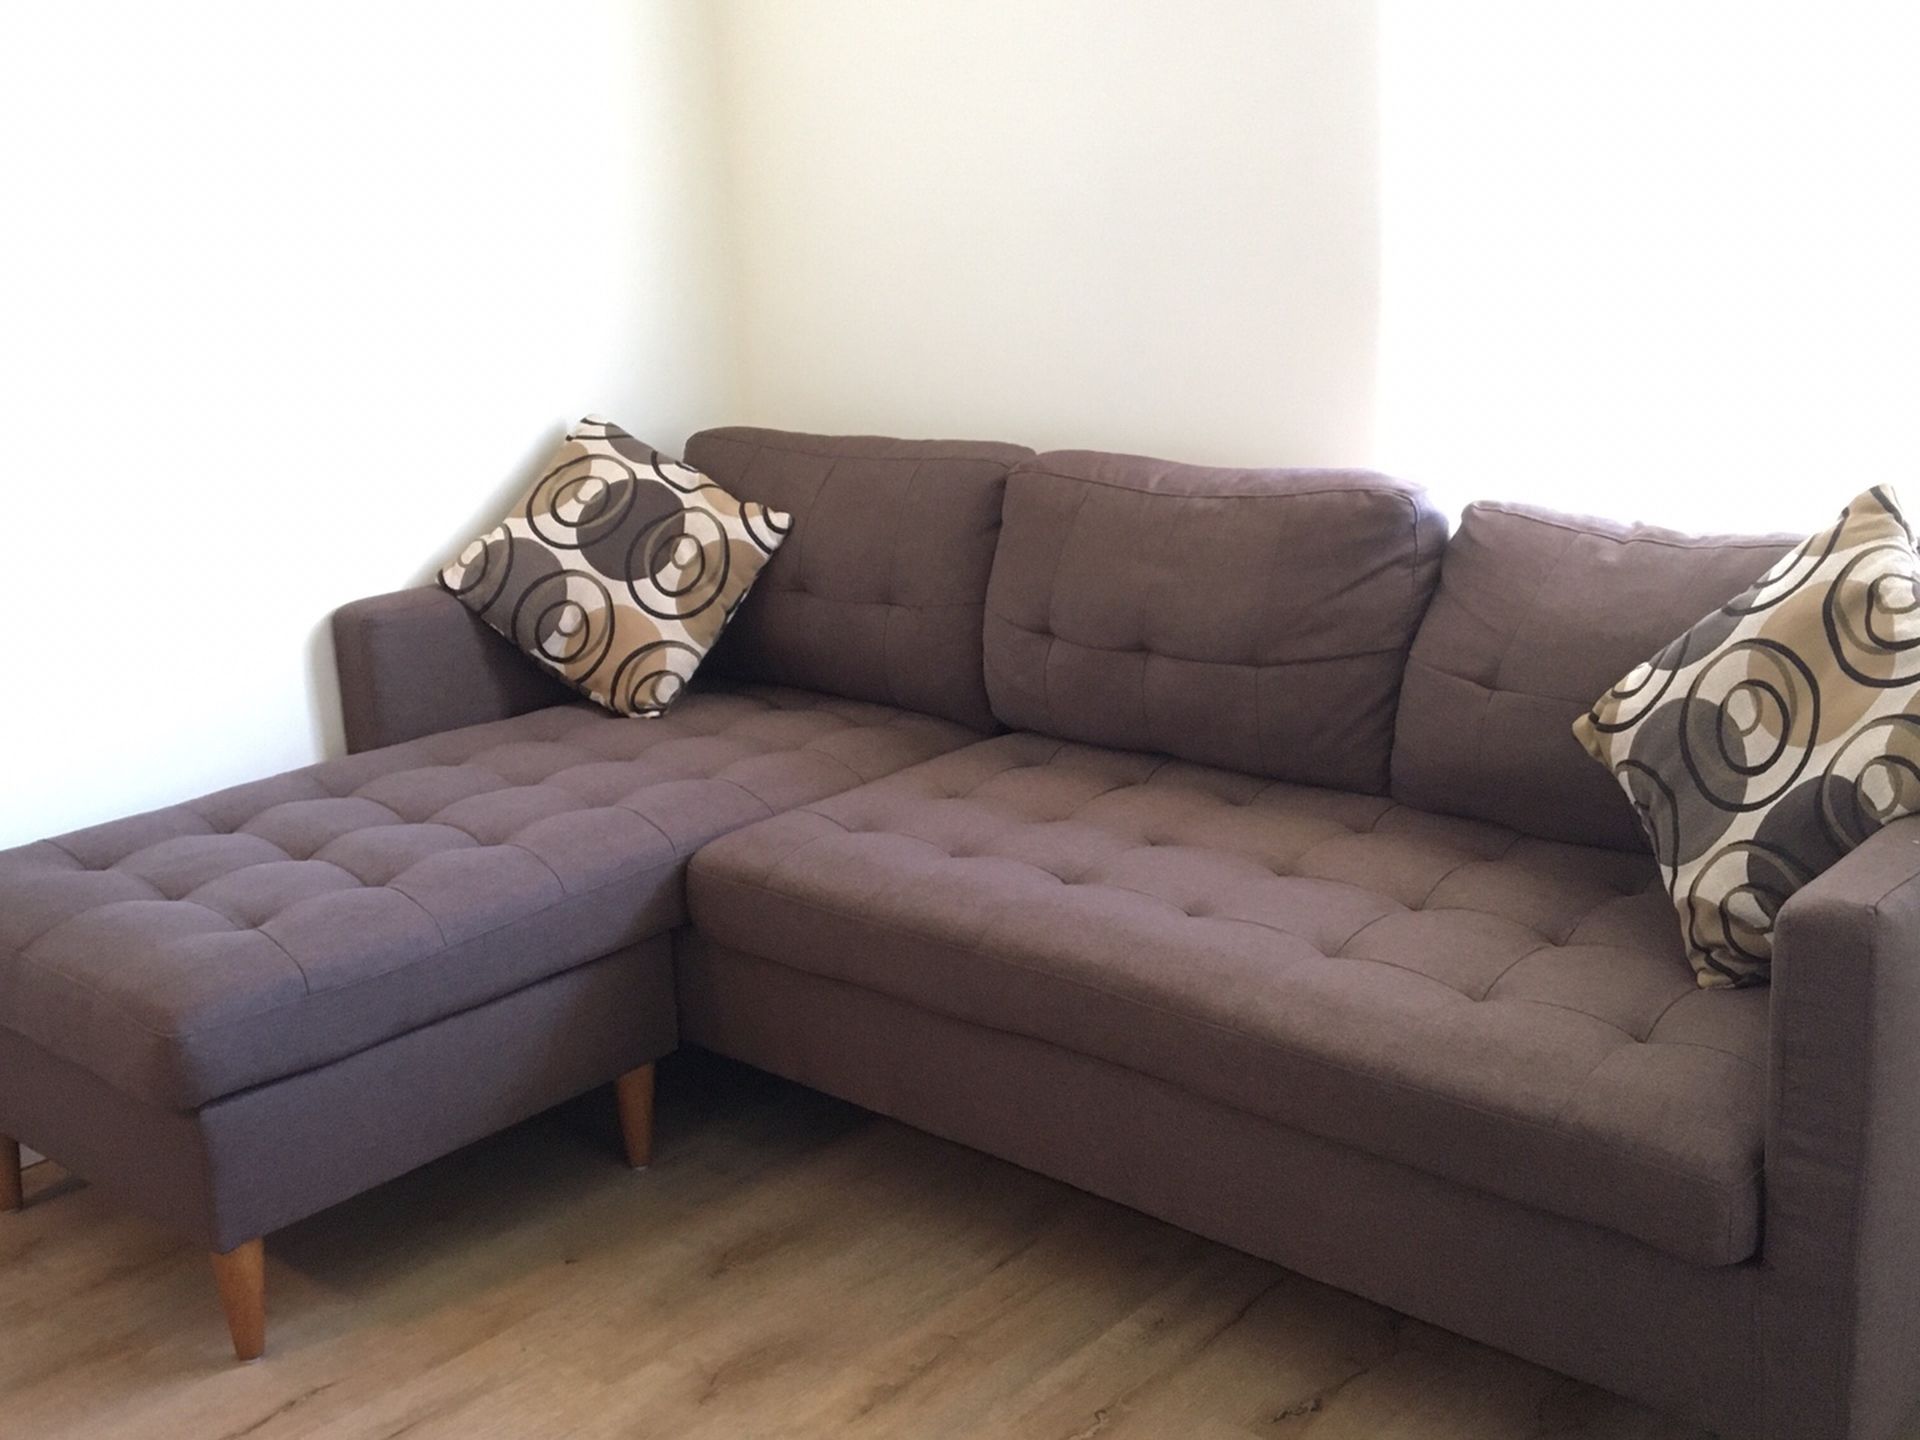 Moving Sale Sectional Couch Very Good Condition Like New